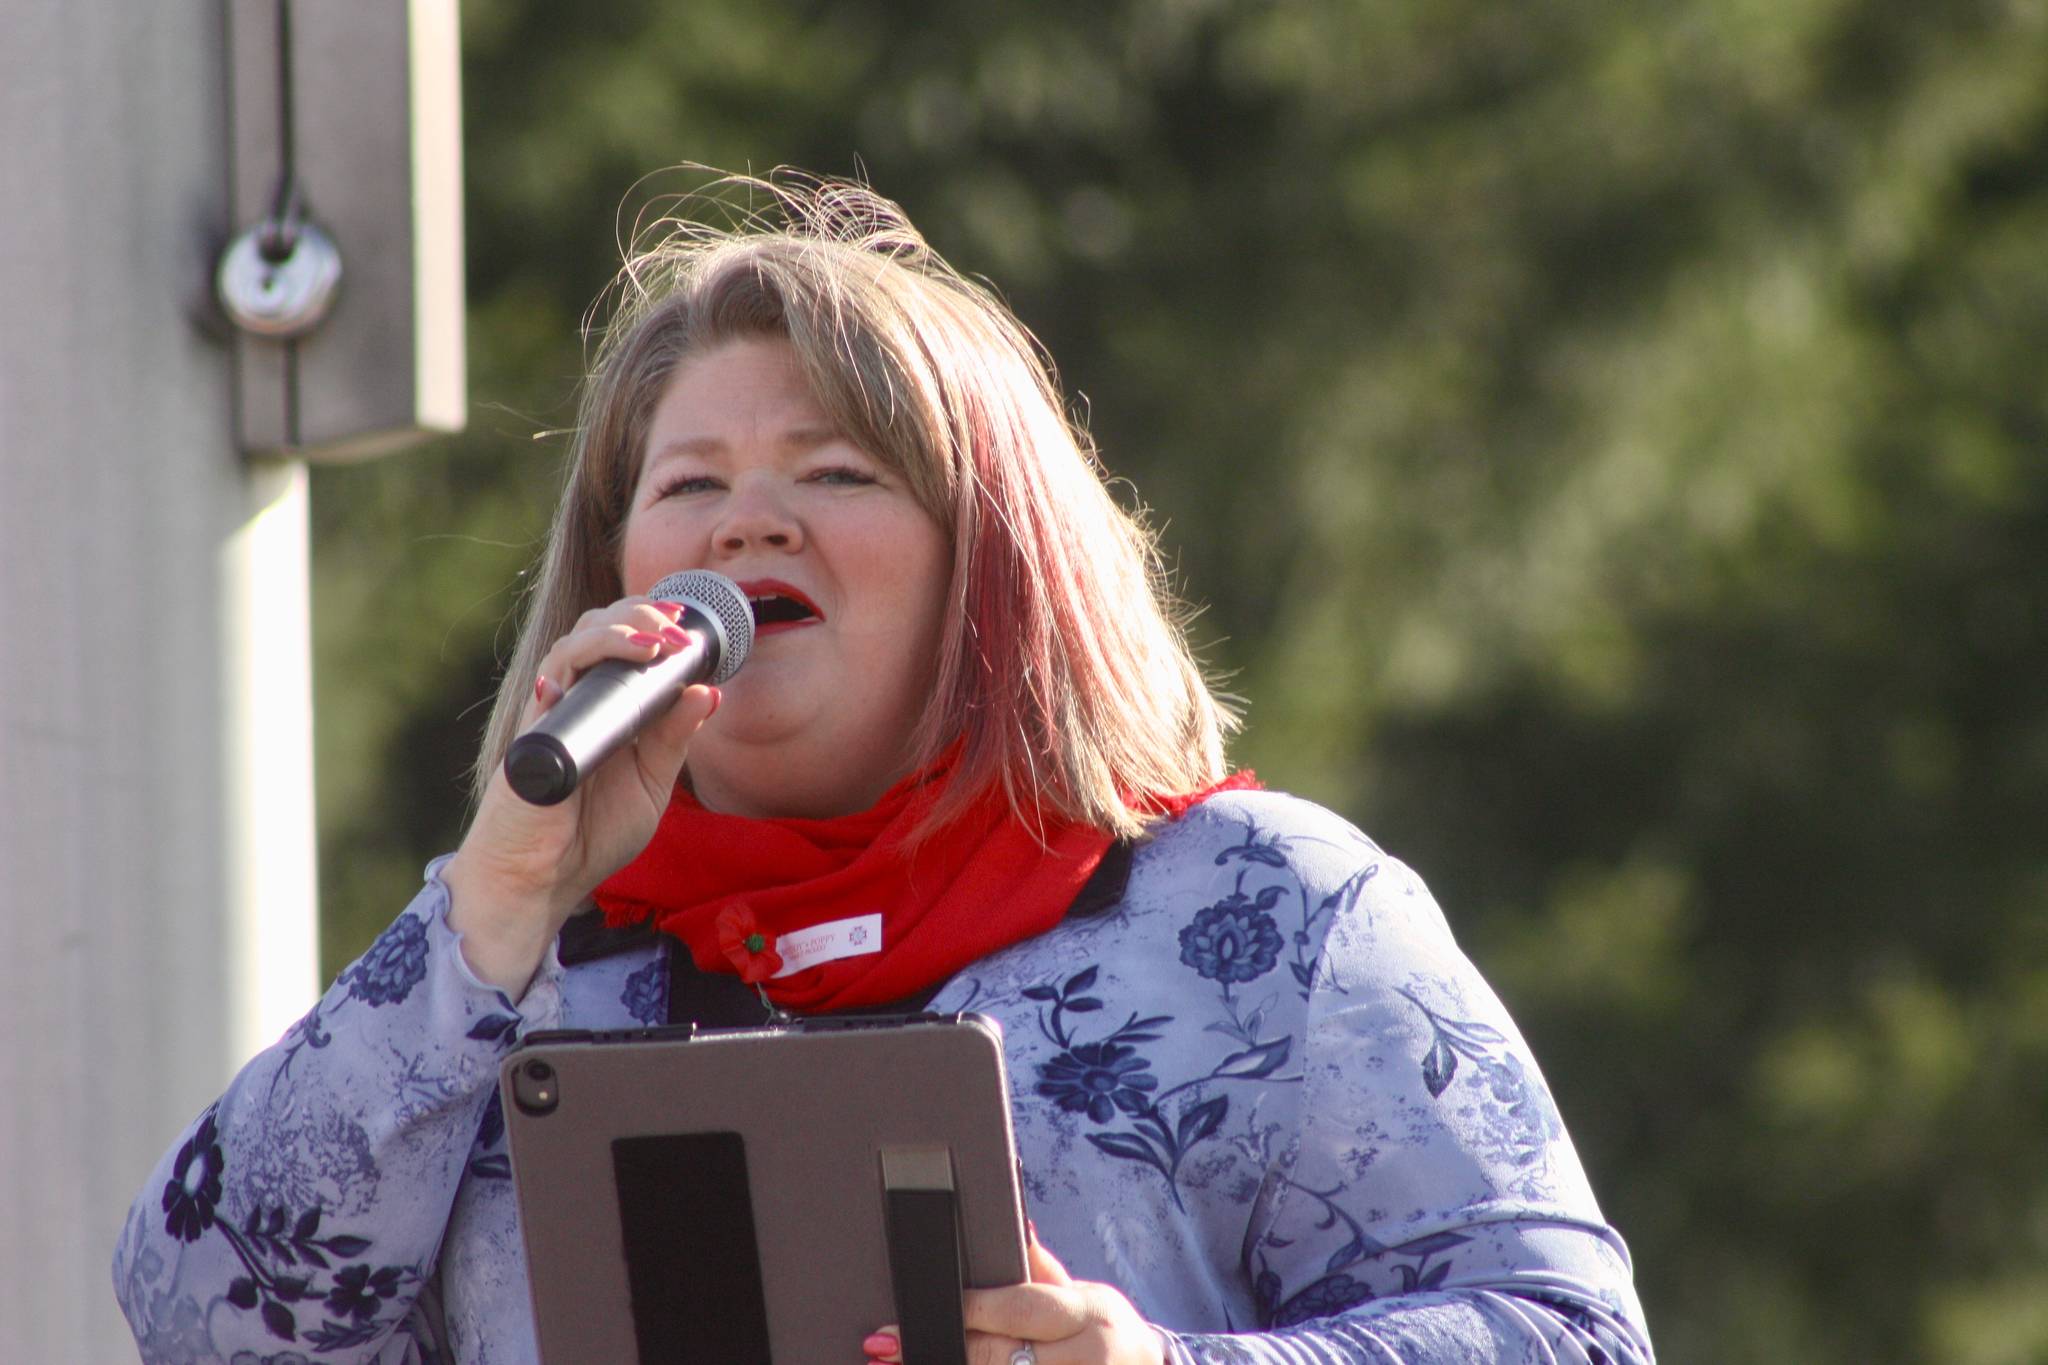 Lindsey Delmarter sings “God Bless America” during the program at Tahoma National Cemetery. MARK KLAAS, Kent Reporter